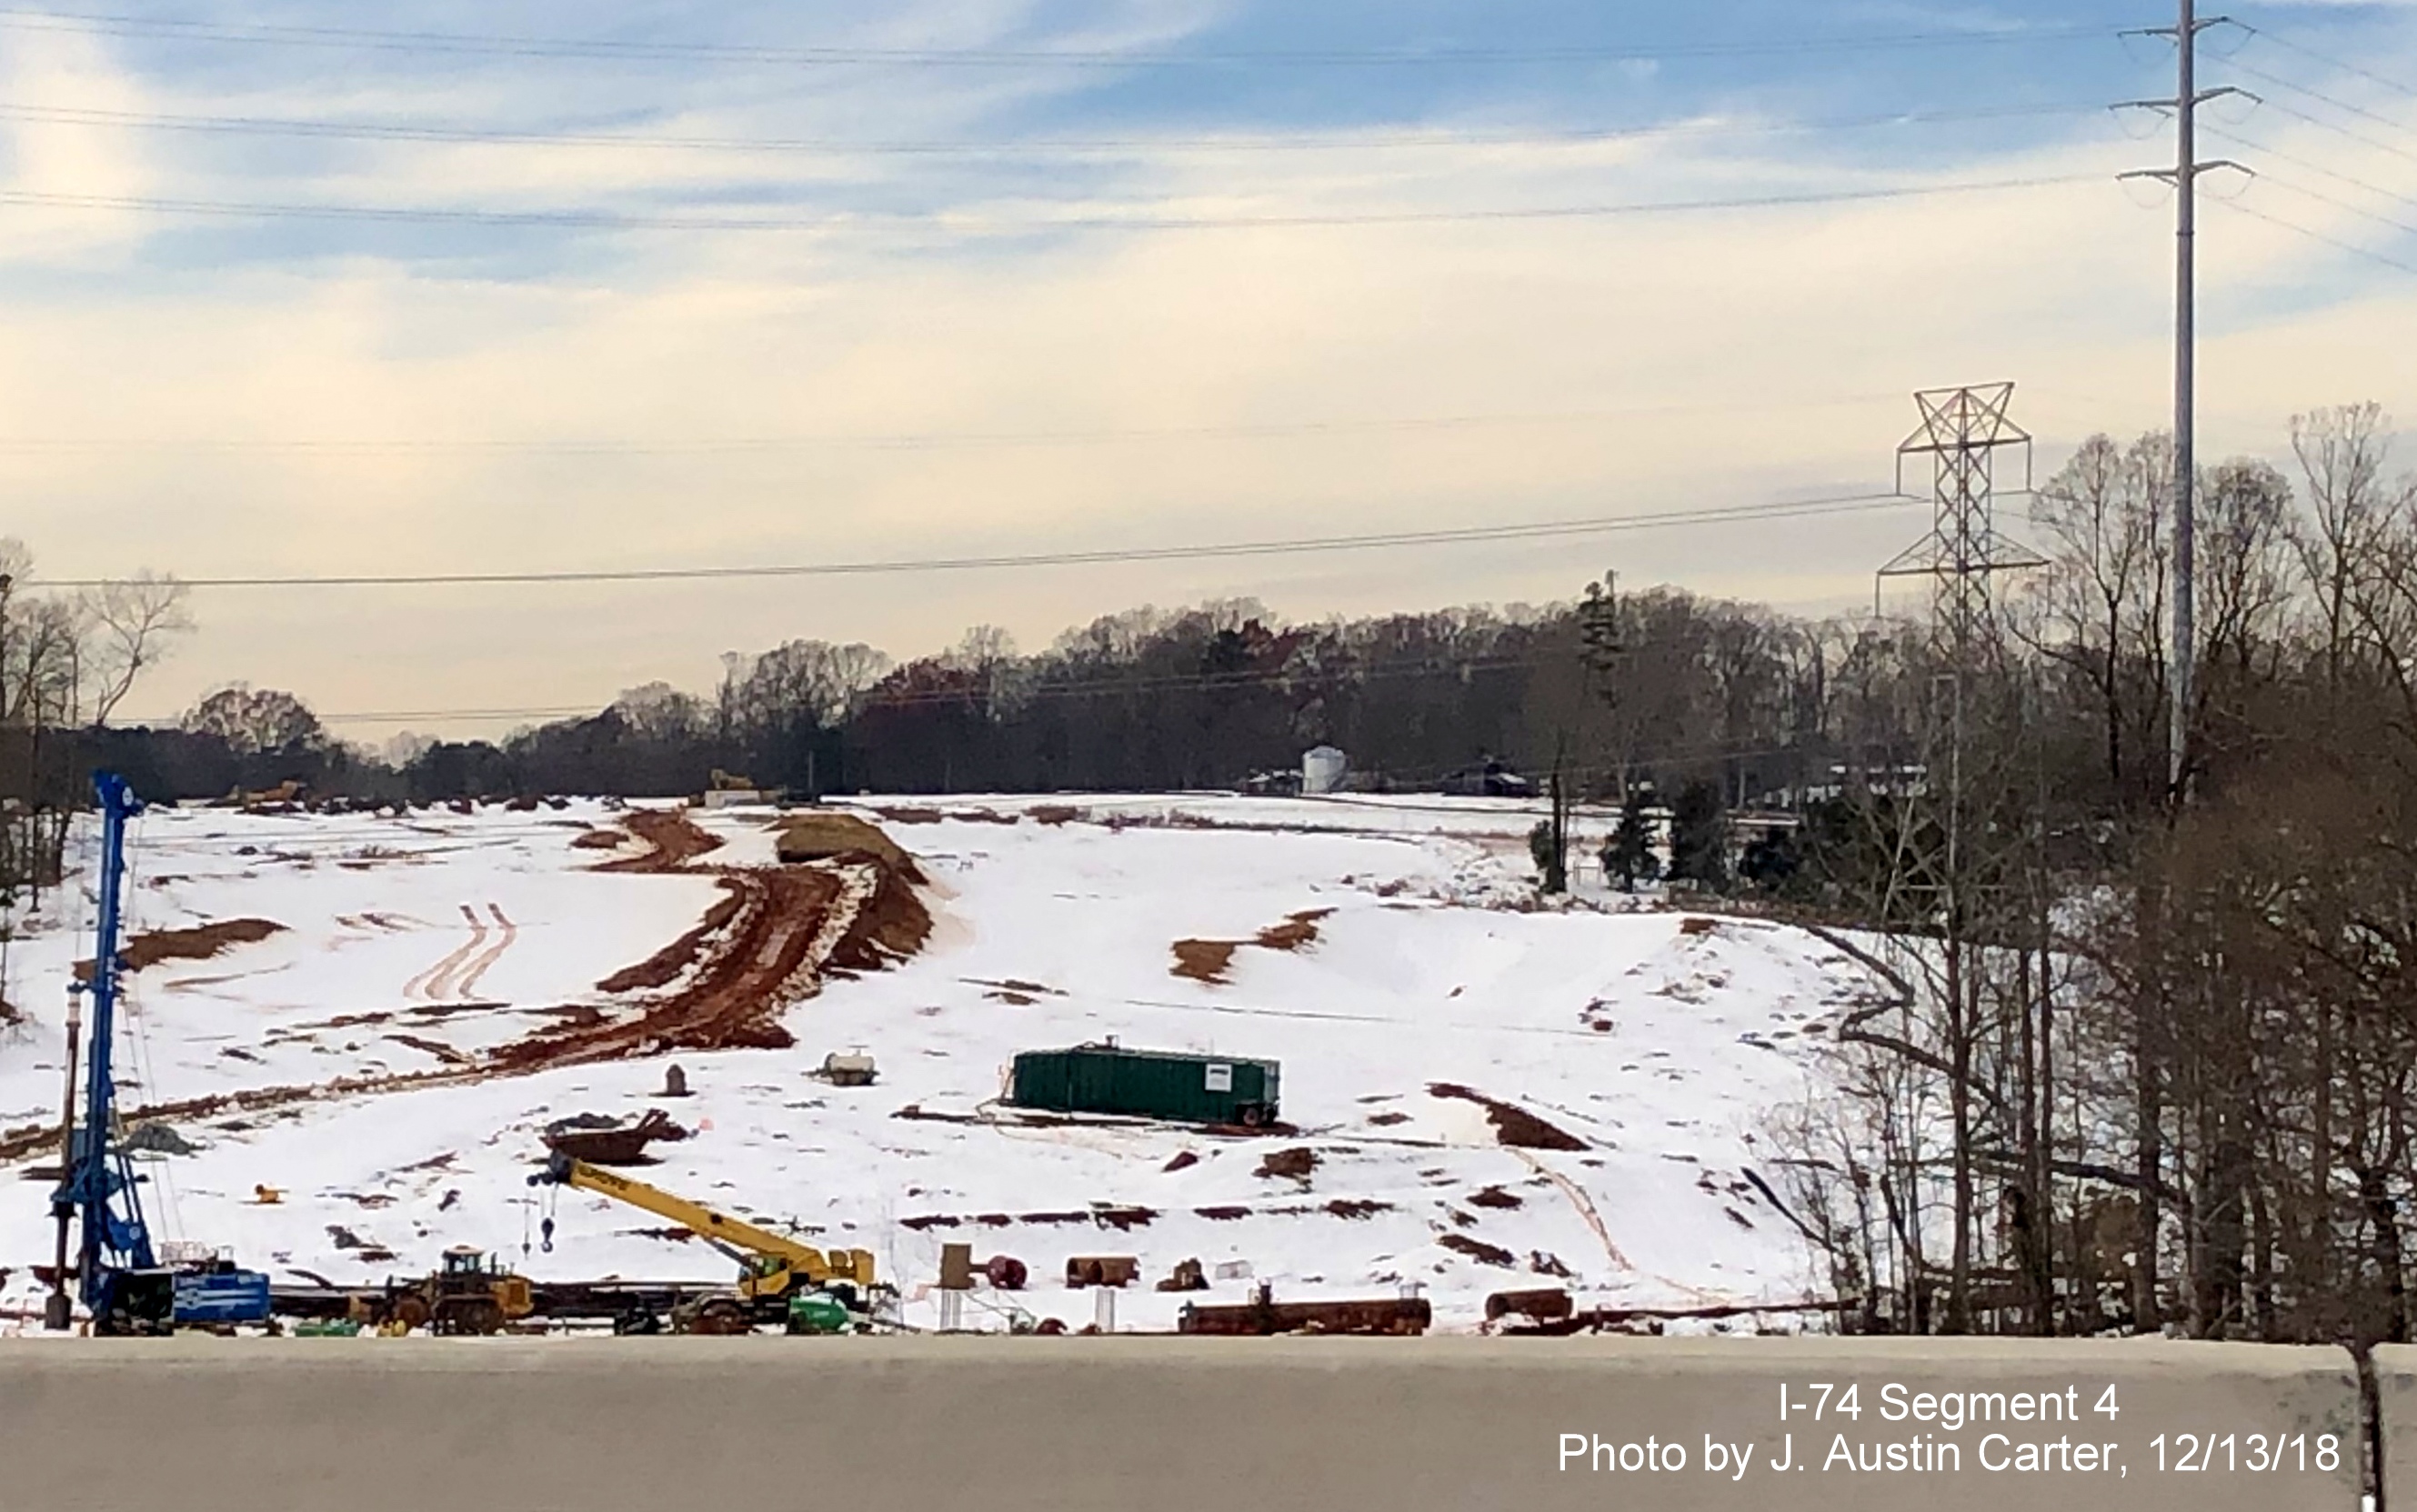 Image of Future I-74/Winston-Salem Northern Beltway under construction to the east of US 158, by J. Austin Carter